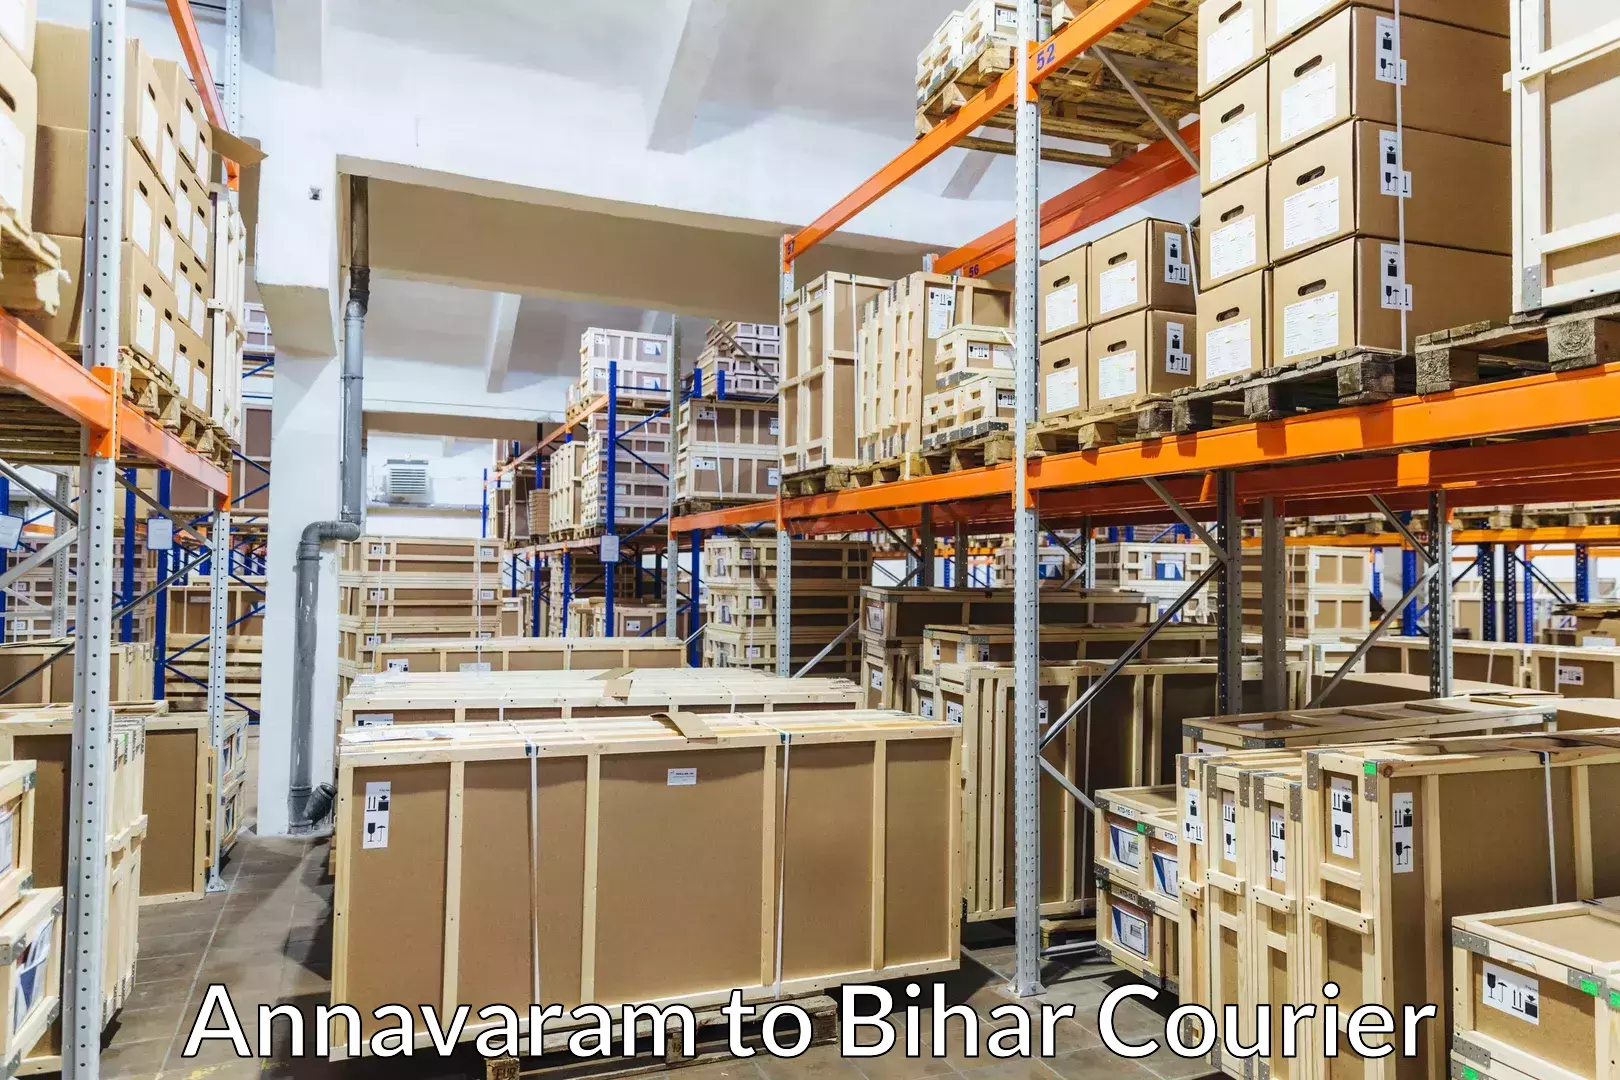 Moving and handling services in Annavaram to Bihar